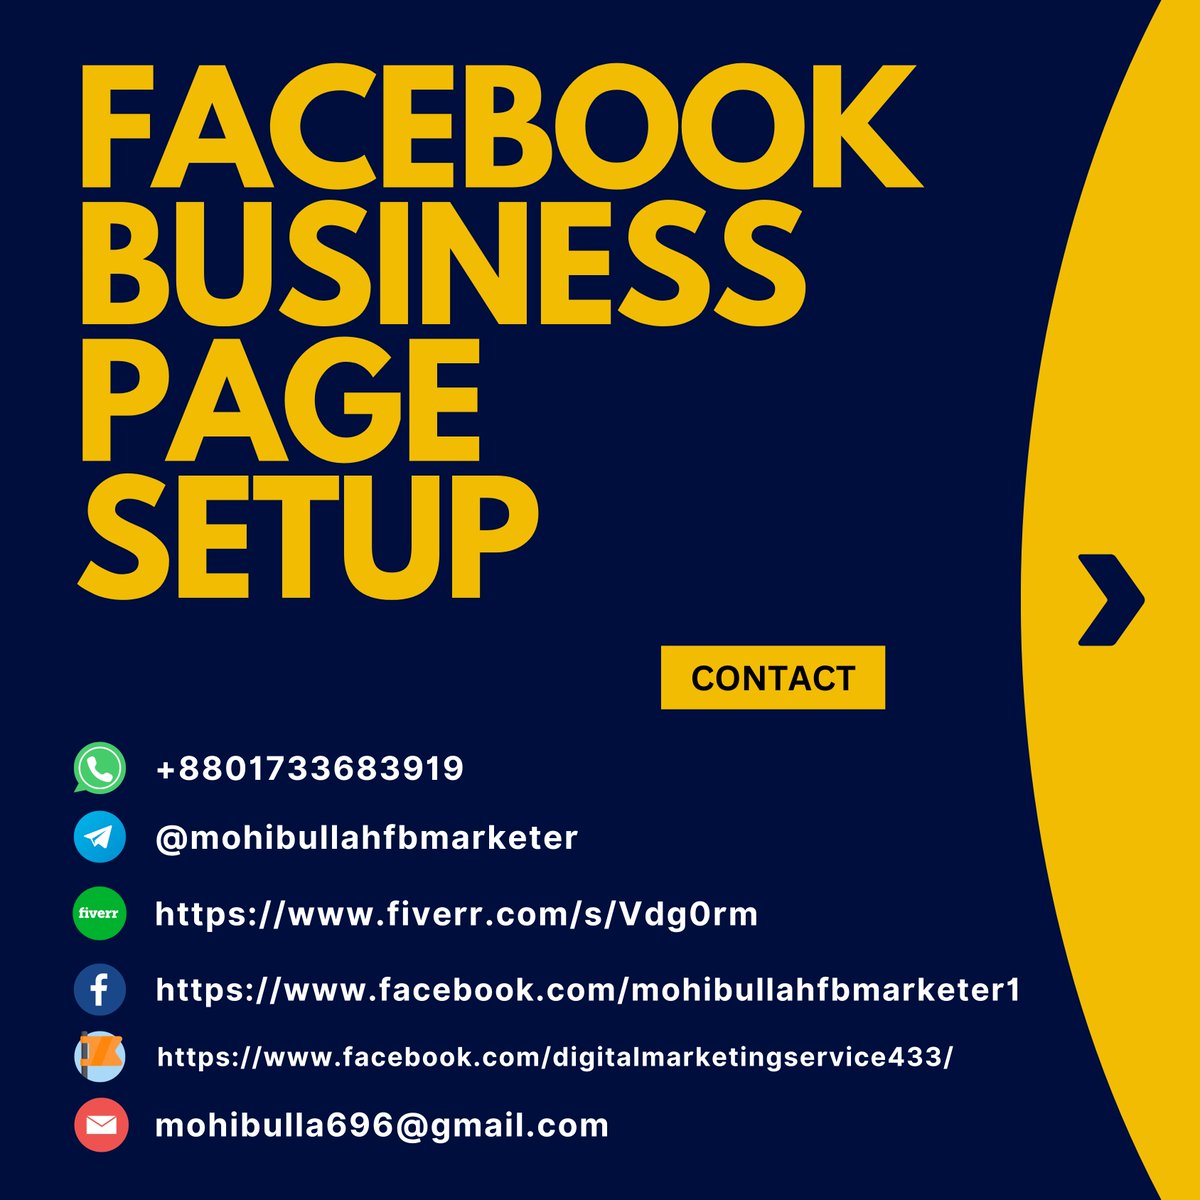 Professional Facebook Business Page Create And A to Z Setup

#facebookpagecreate #facebookpagesetUp #facebookbusinsspage #facebookbusinesspagesetup #FacebookPage #facebookpagefullsetup #businesspage #businesspagesetup #businesspagecreate #dms #socialmediamarketing